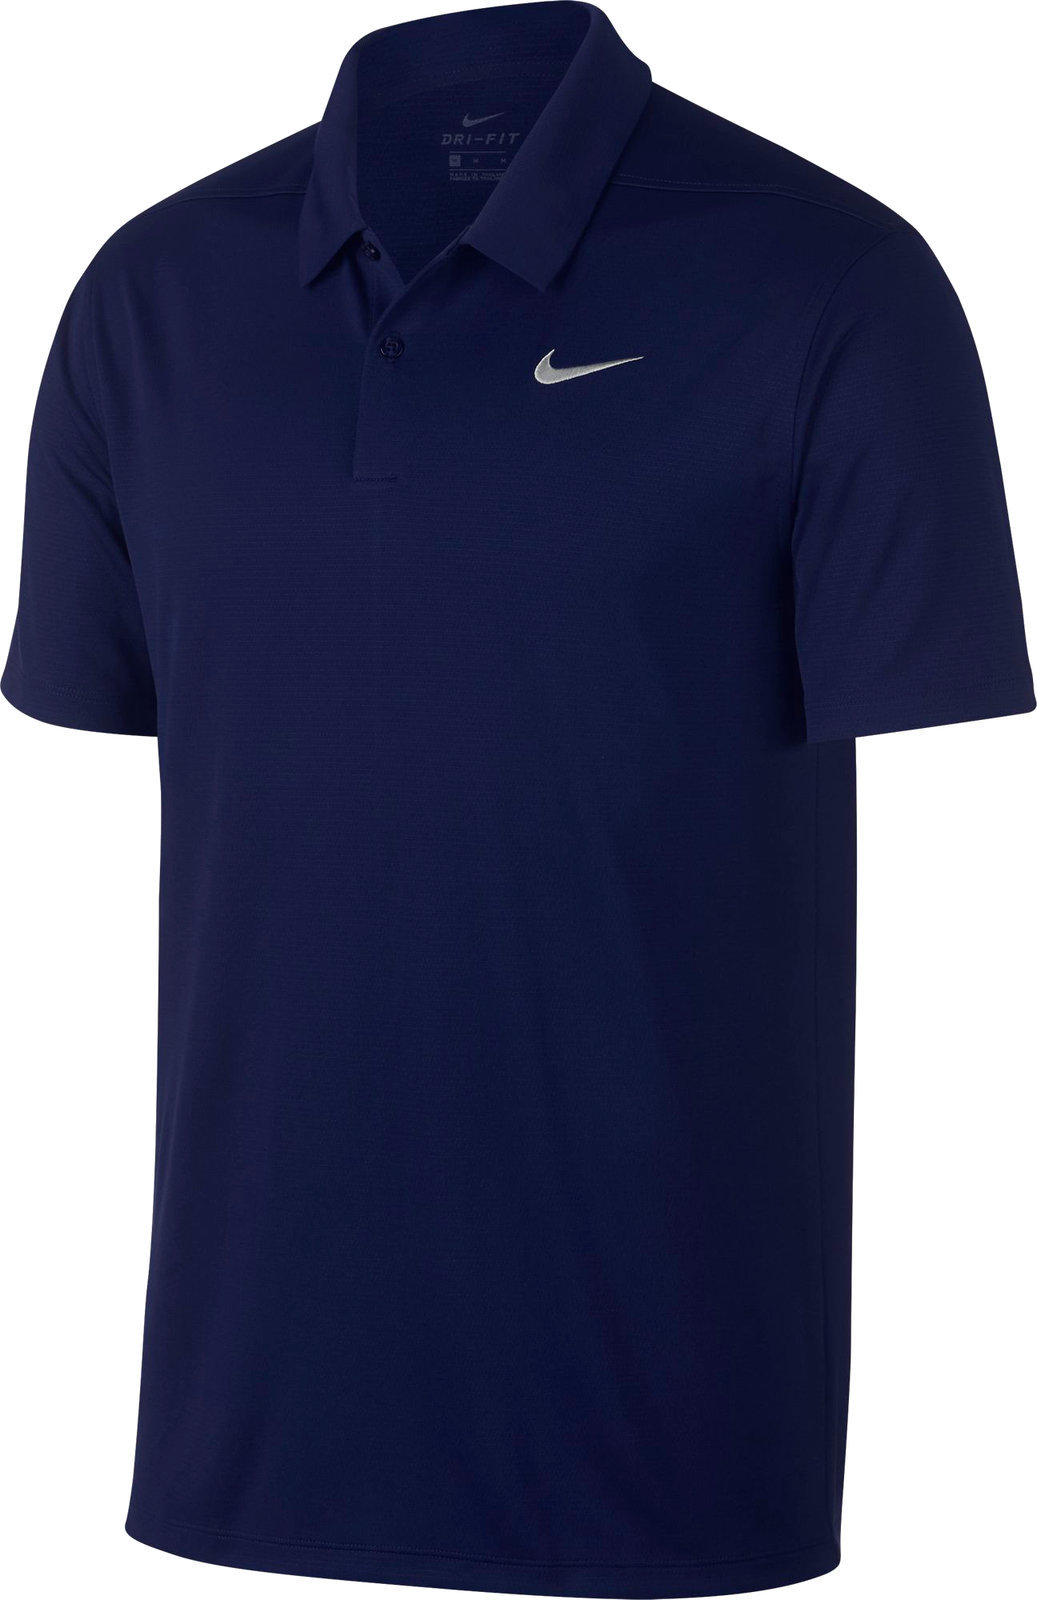 Polo trøje Nike Dry Essential Solid Blue Void/Flat Silver M